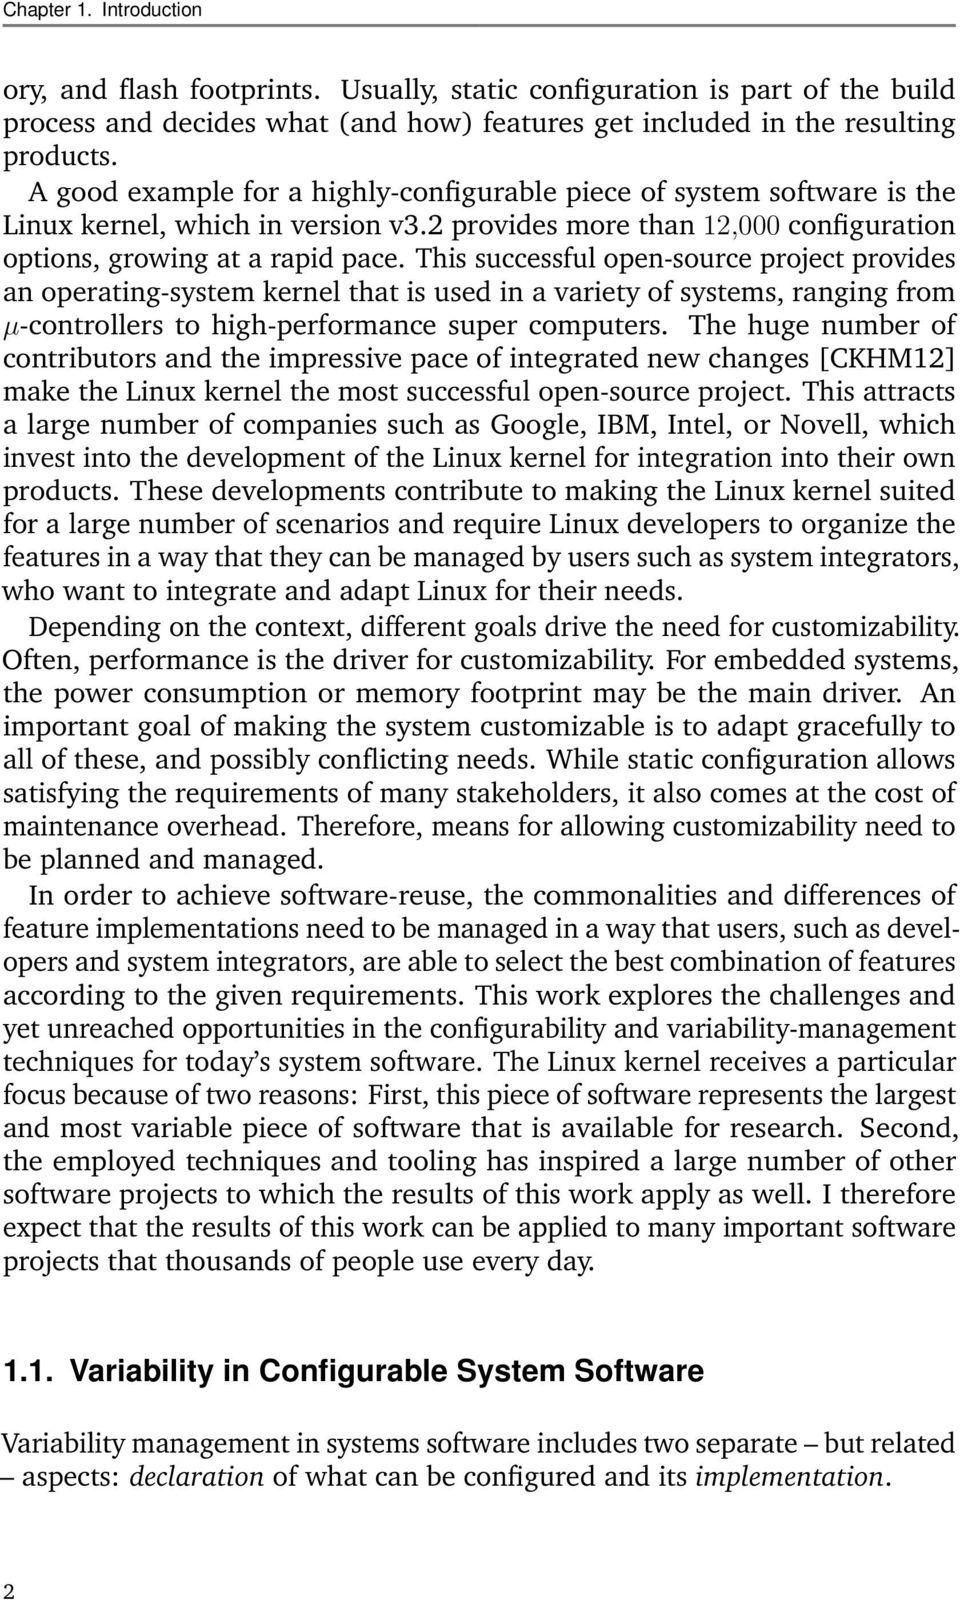 This successful open-source project provides an operating-system kernel that is used in a variety of systems, ranging from µ-controllers to high-performance super computers.